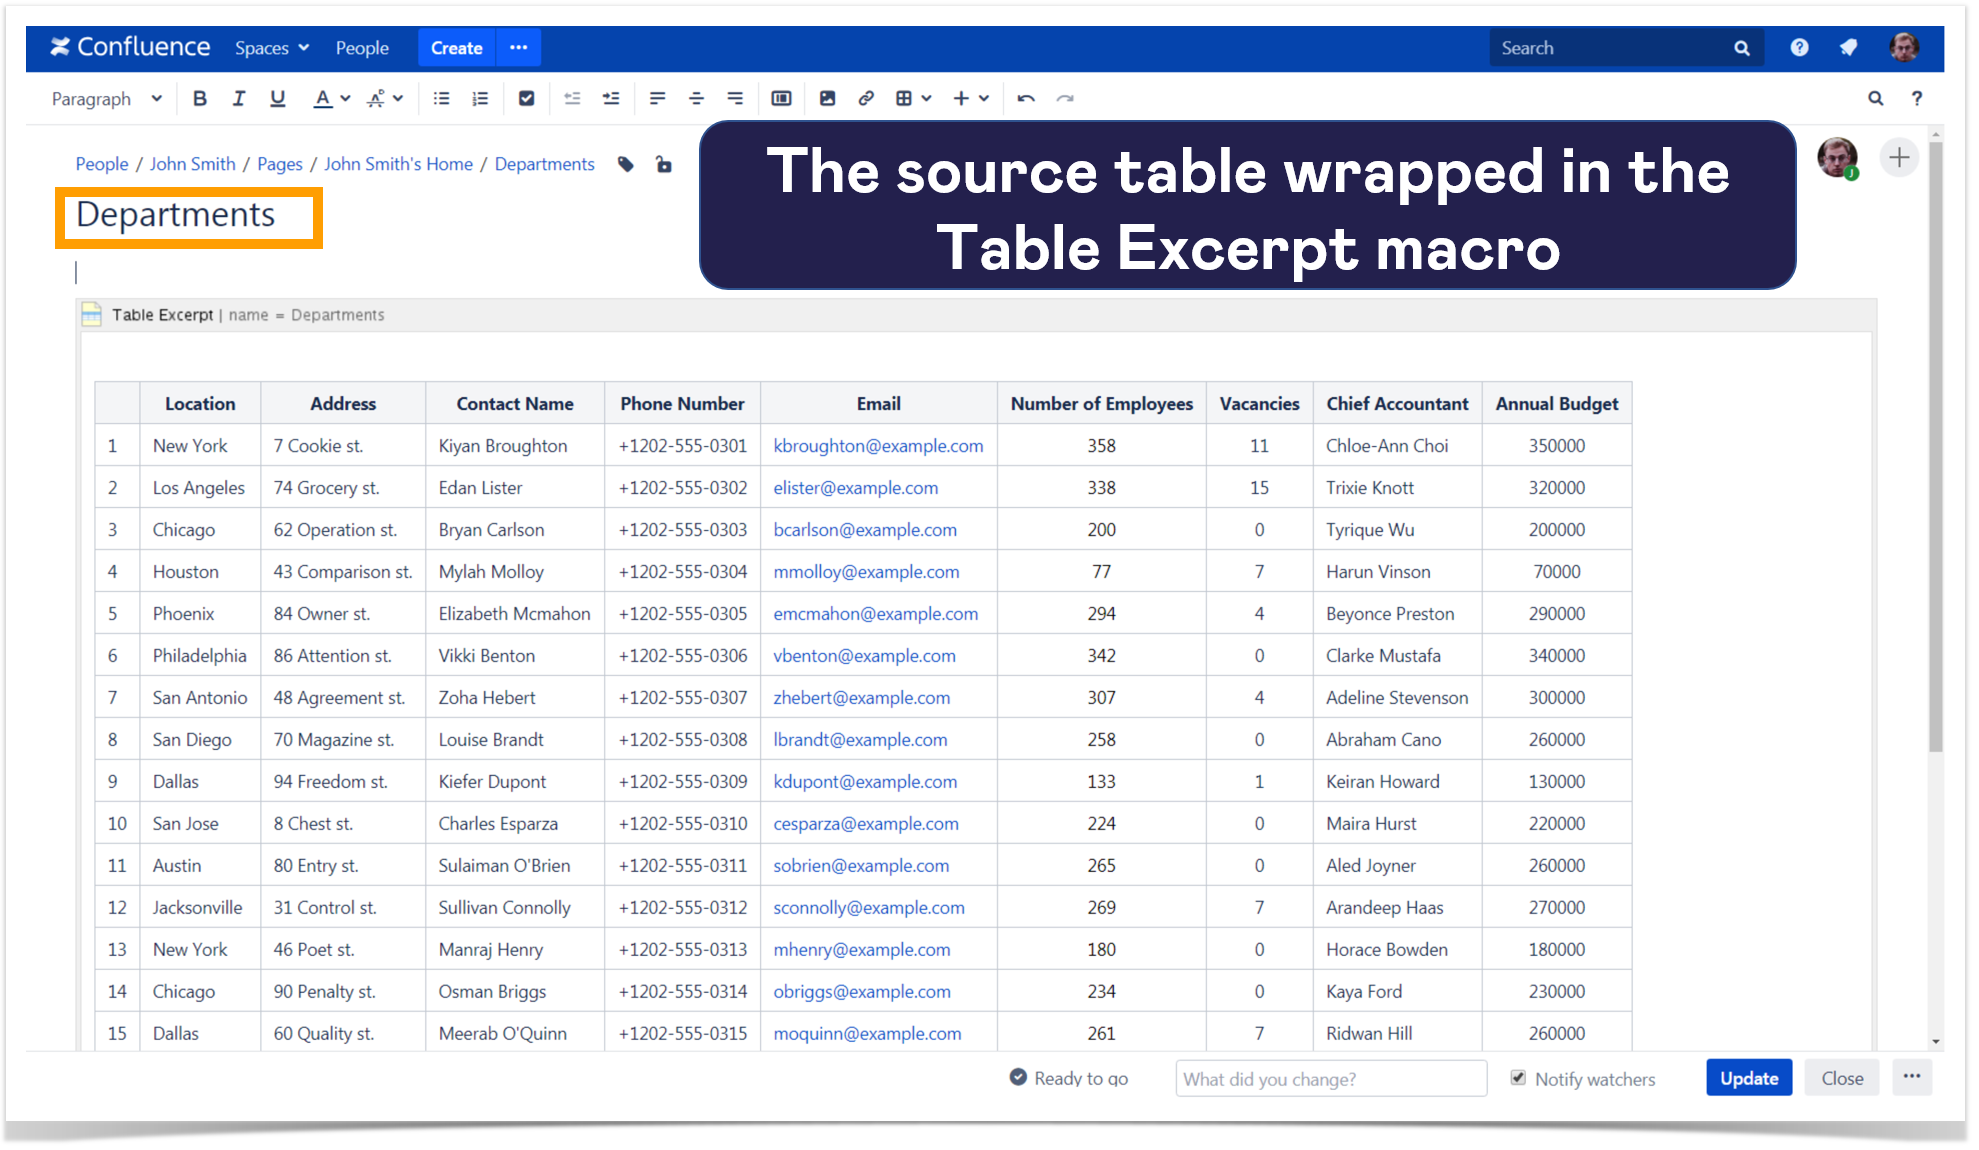 Source table wrapped into the Table Excerpt macro